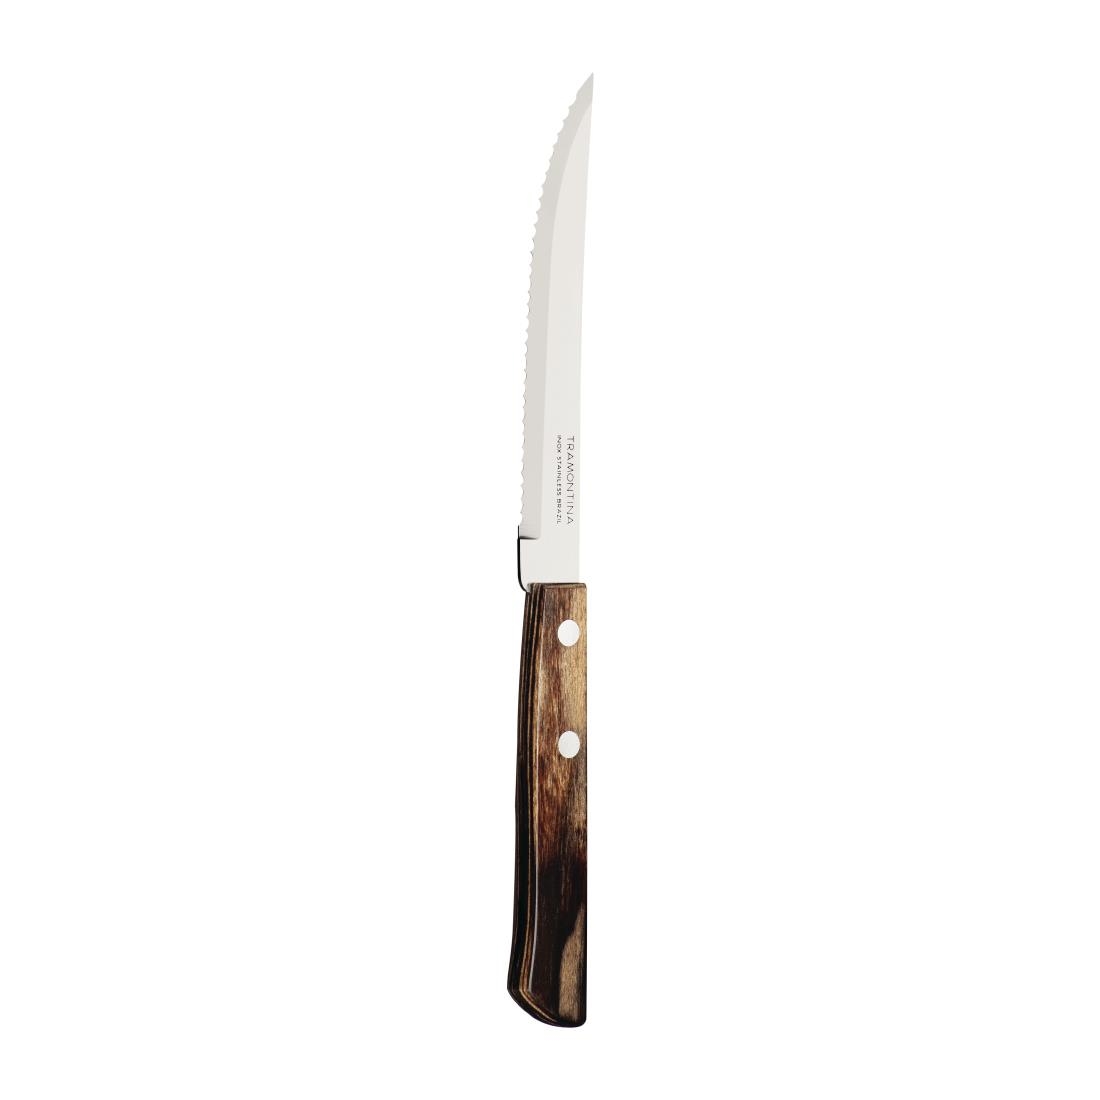 Tramontina Classic Steak and Pizza Knives